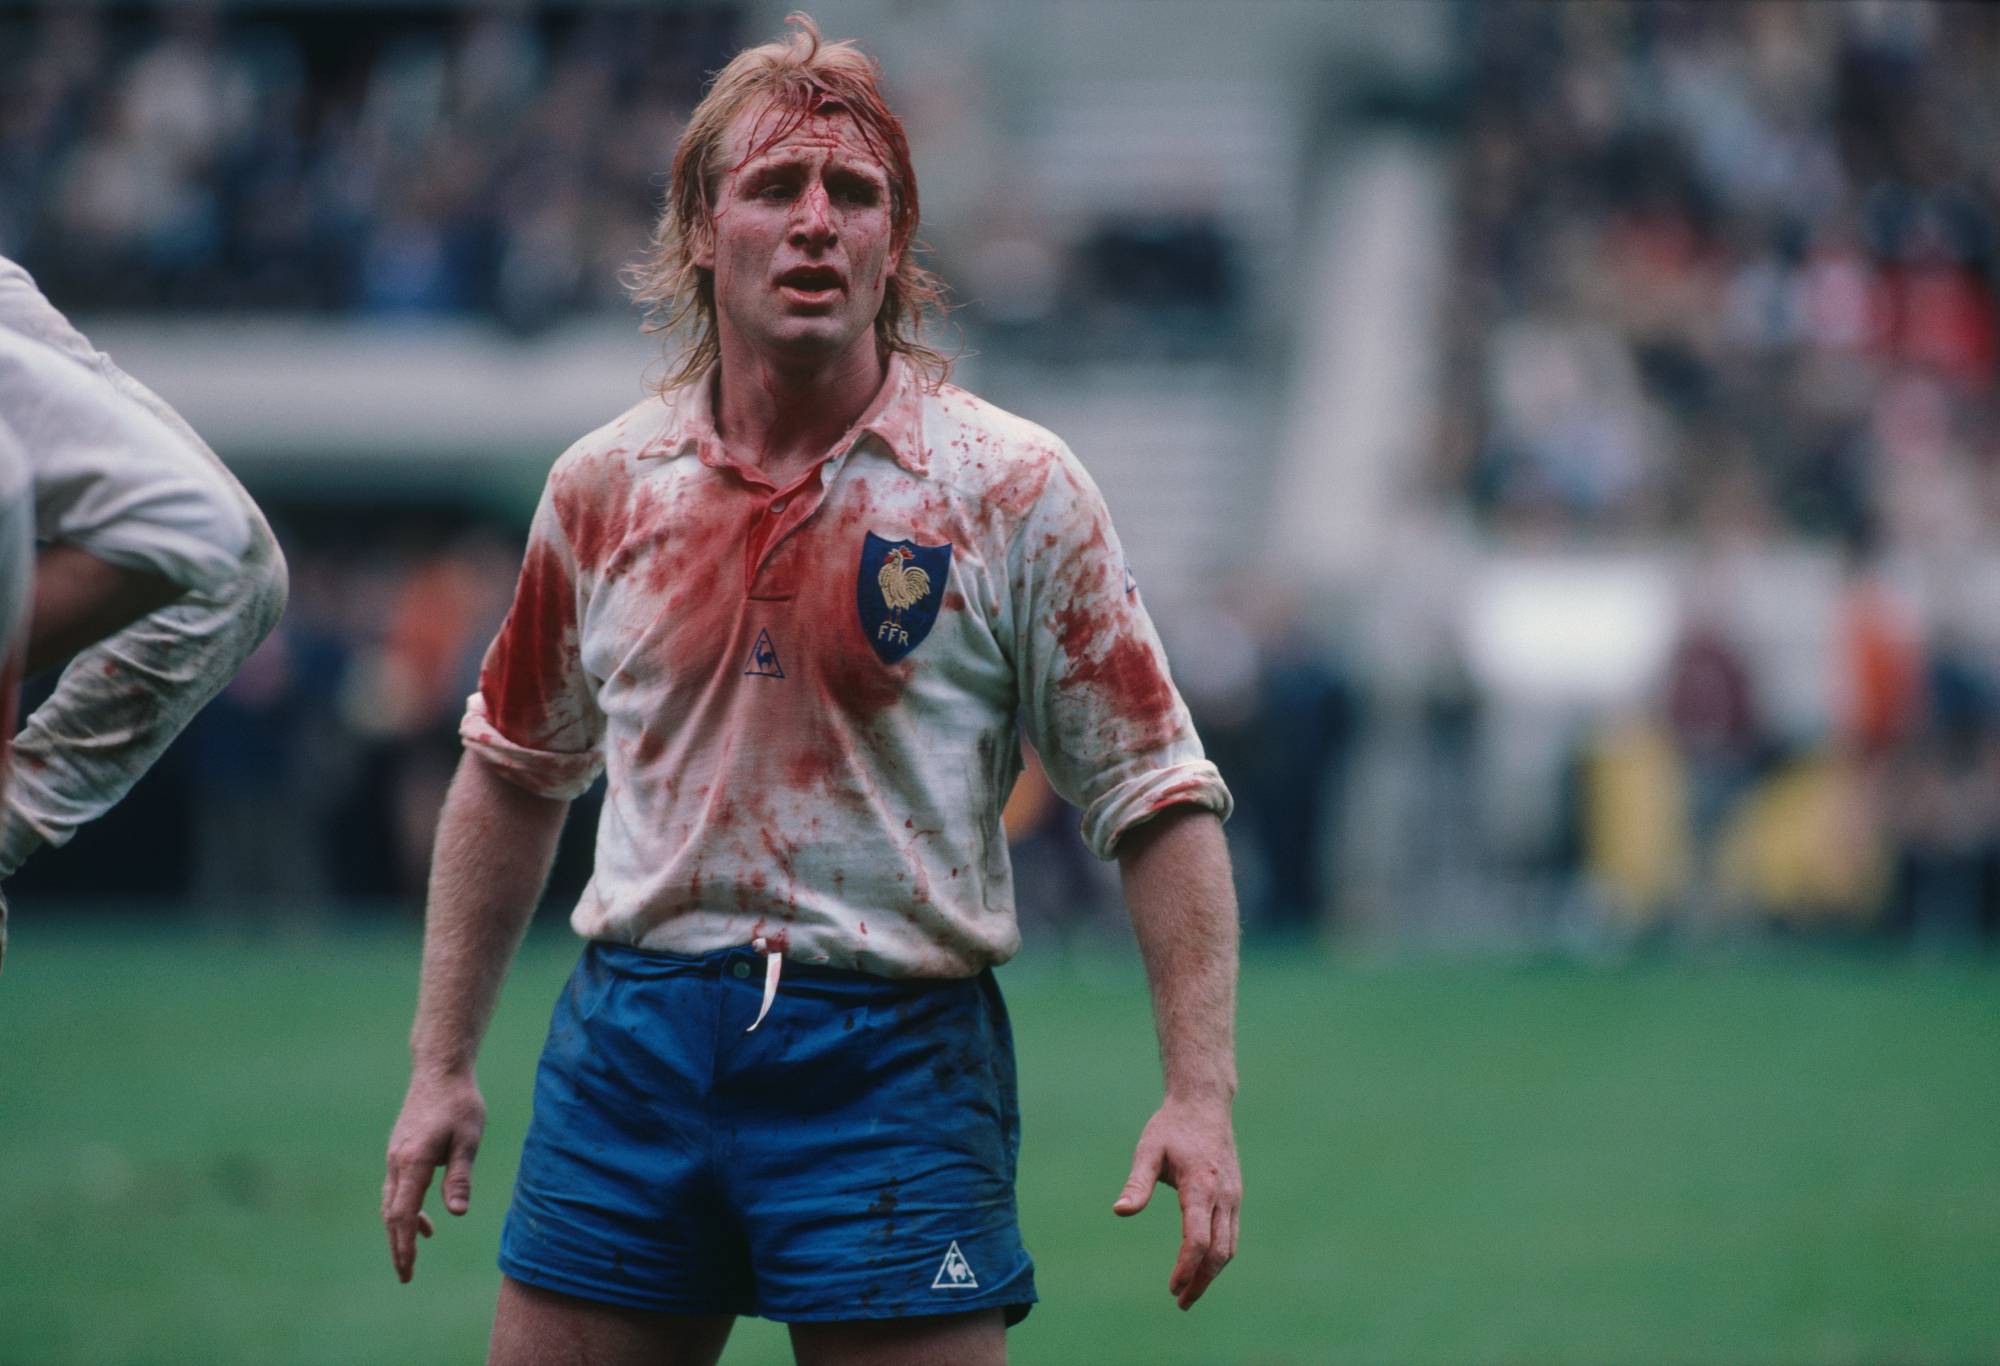 Jean-Pierre Rives, nicknamed "Casque d'Or" (French for Golden helmet) from France, with a bloody face, during a Five Nations Championship match against Wales. France won 16-9. (Photo by Jean-Yves Ruszniewski/TempSport/Corbis/VCG via Getty Images)